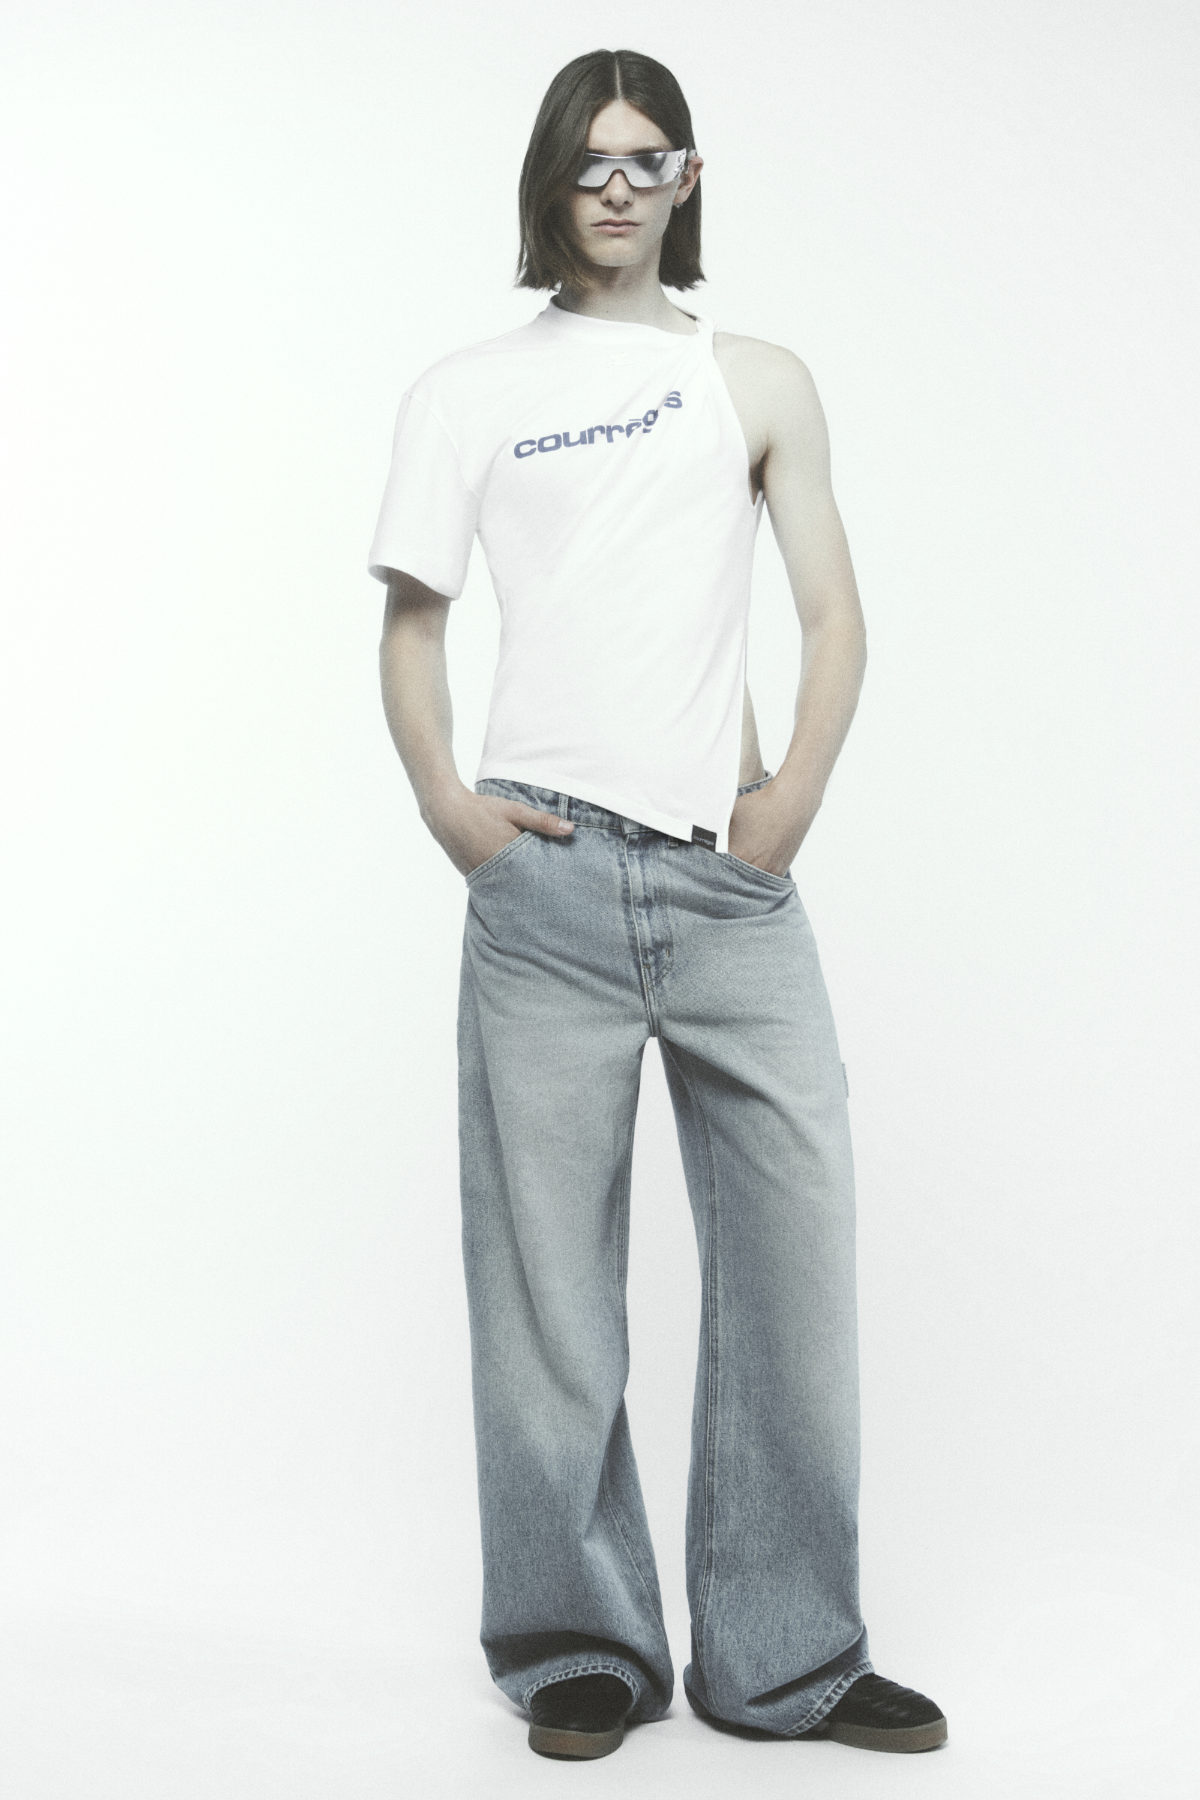 Courrèges Presents Its New Spring Summer 2023 Menswear Collection